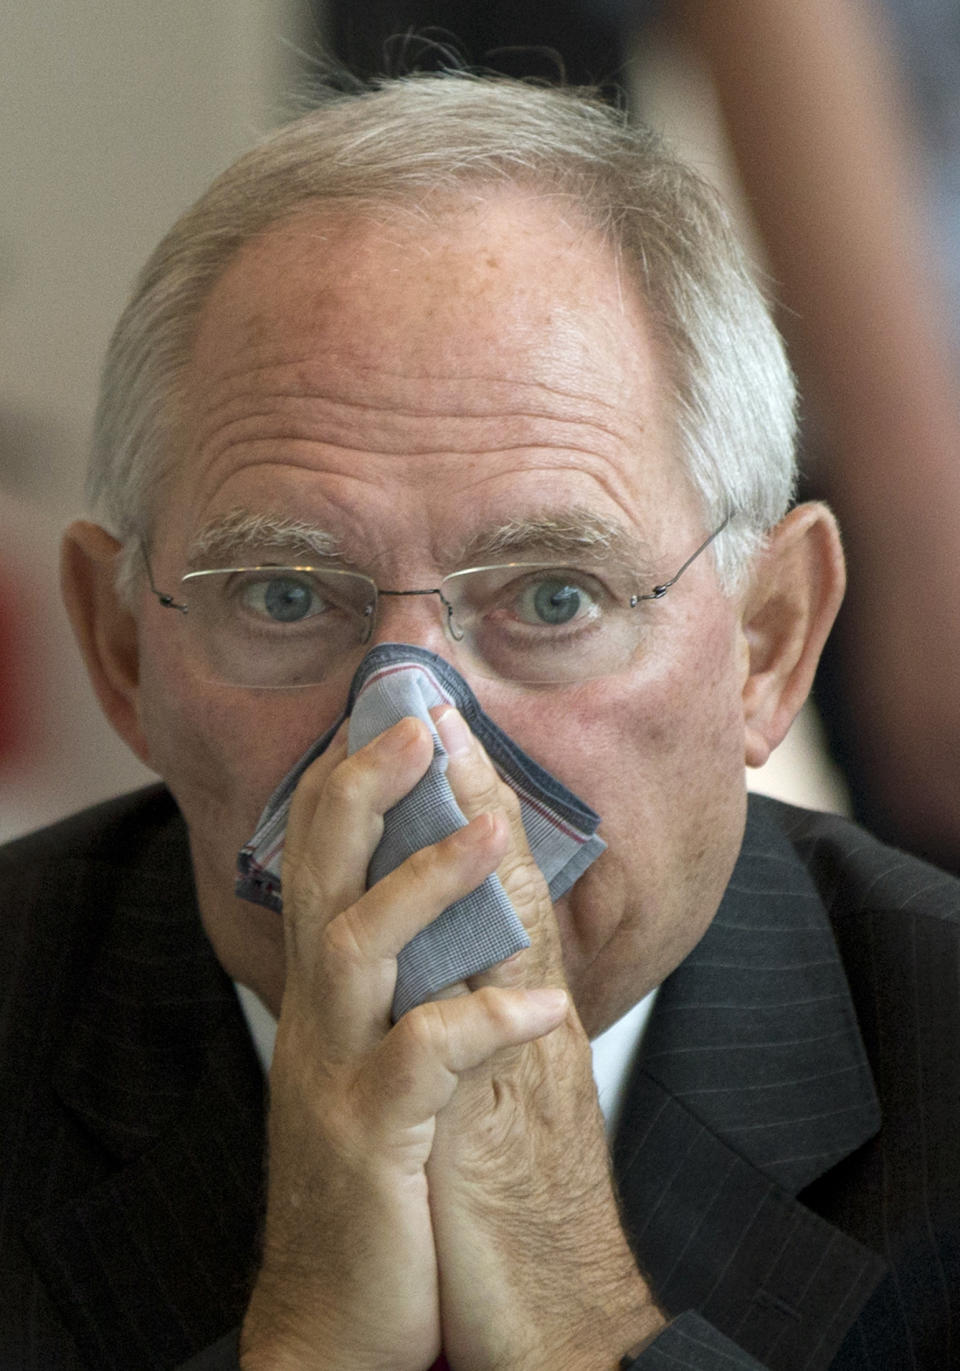 German Finance Minister Wolfgang Schaeuble wipes his nose before a meeting of the CDU/CSU parliamentary parties prior to a special session of the Germany Parliament Bundestag in Berlin, Germany, Thursday, July 19, 2012. Germany's Parliament is interrupting its summer break to vote on a rescue package worth up to euro 100 billion (US dollar122 billion) for Spain's ailing banks. (AP Photo/Gero Breloer)